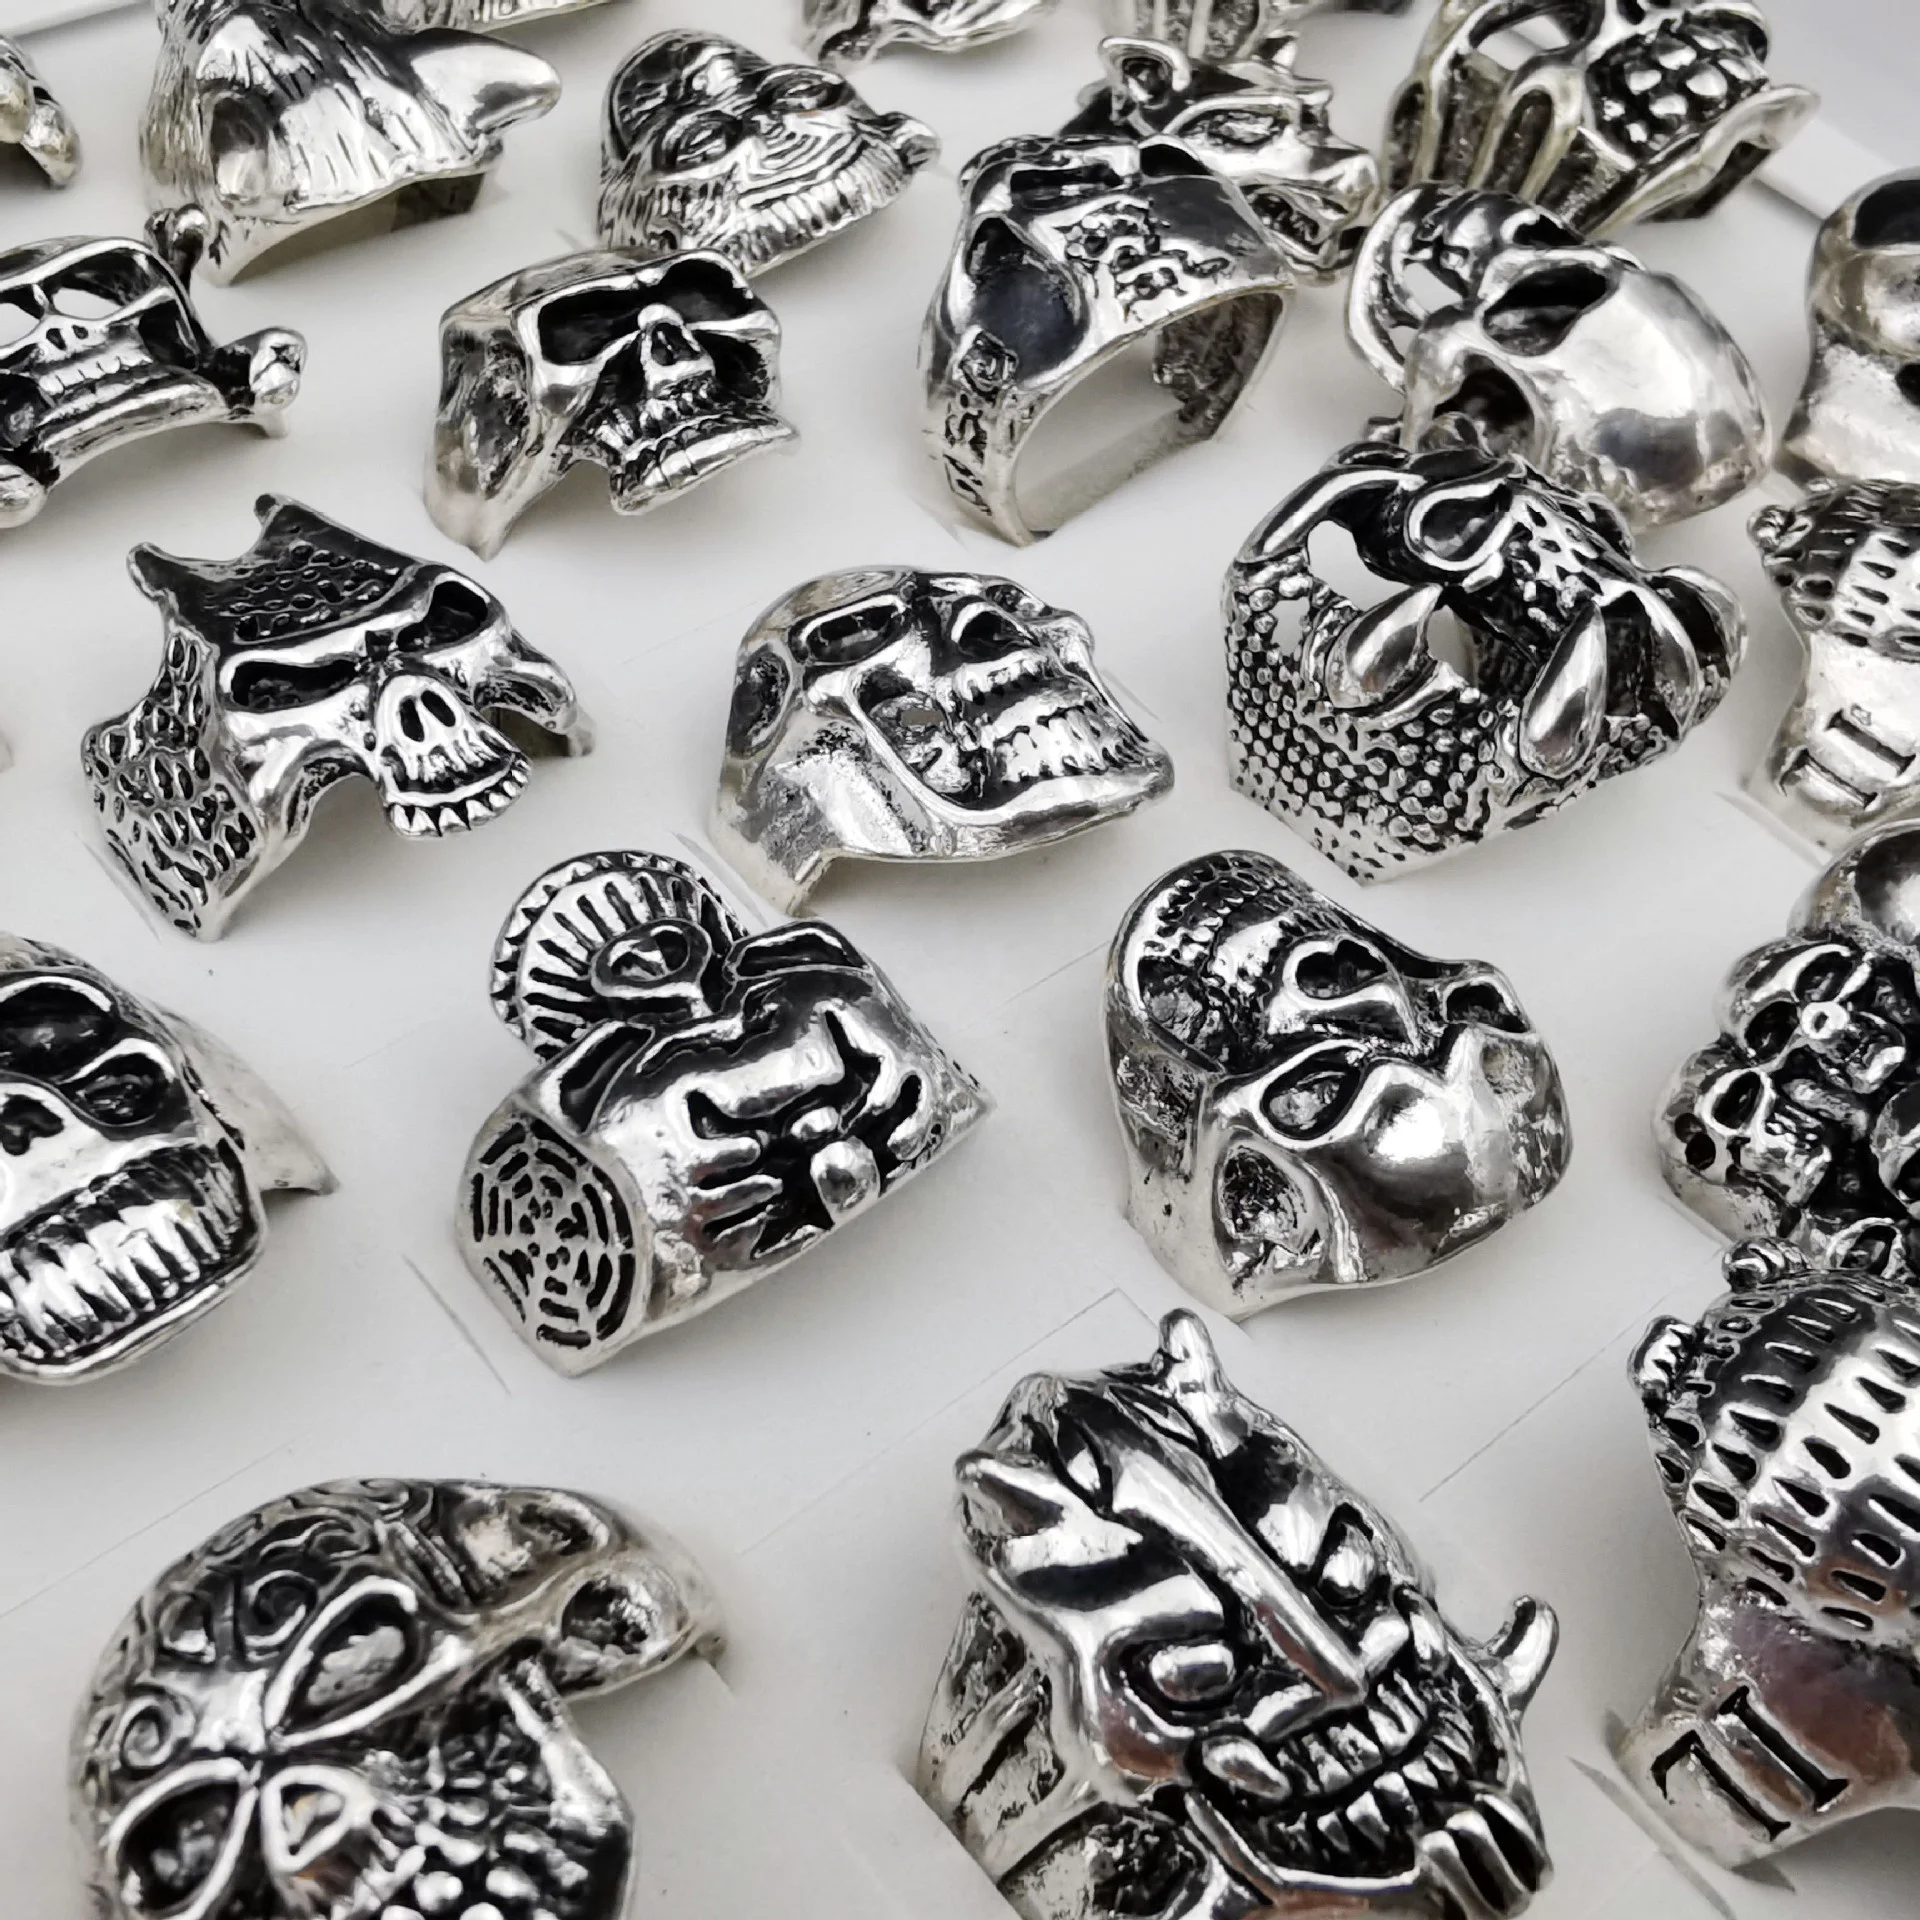 

PUSHI Hot Best Selling Skull Head Alloy Ring Boy Man Exaggerated Ring Mix Bulk New Delivery Jewelry Finger Black Fashion CN;FUJ